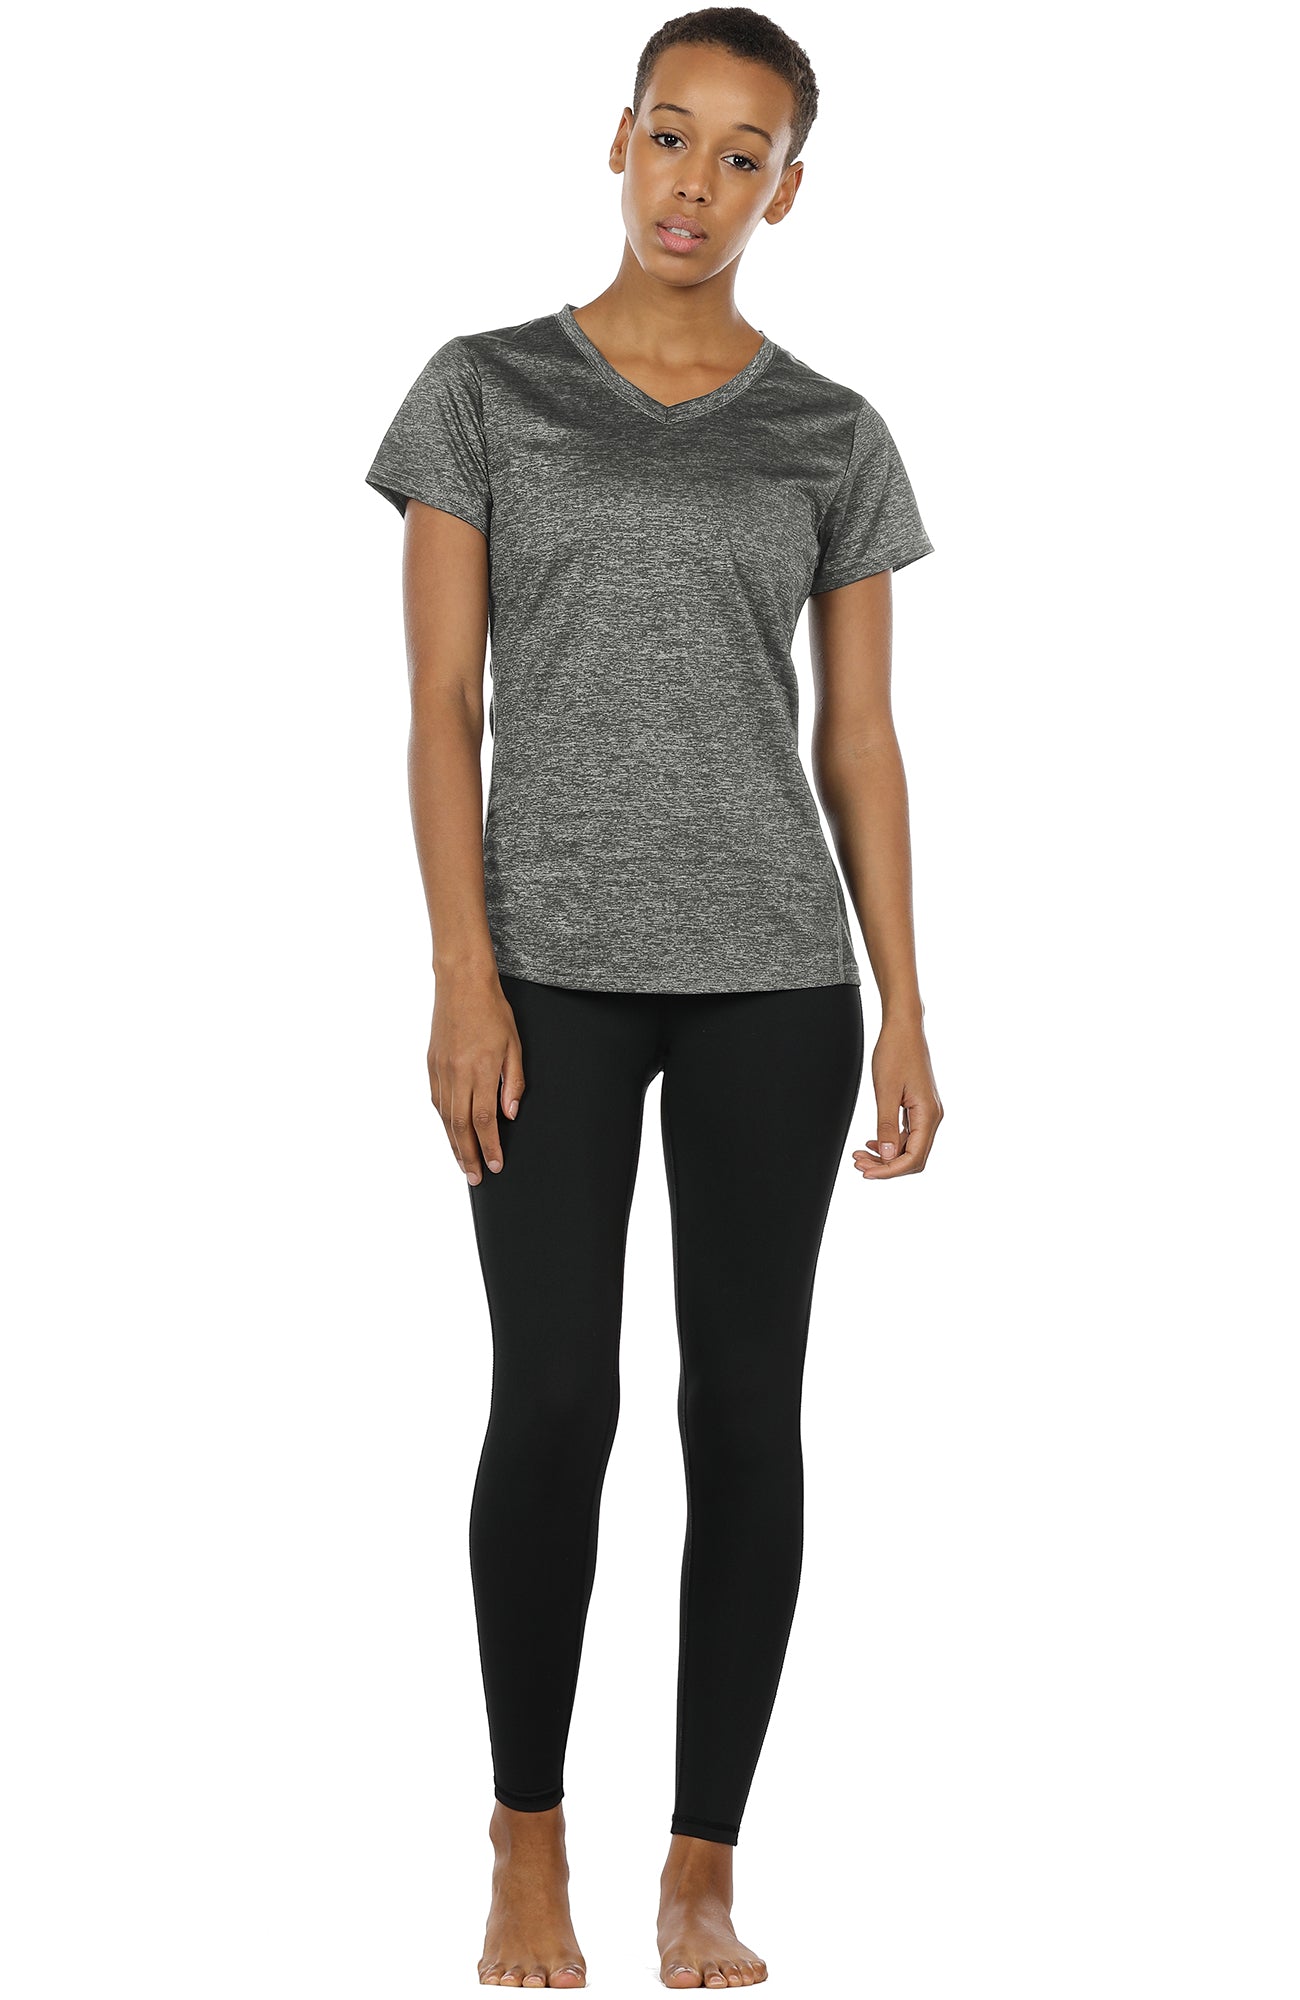 icyzone Long Sleeve Workout Shirts for Women-Women's Athletic Tops